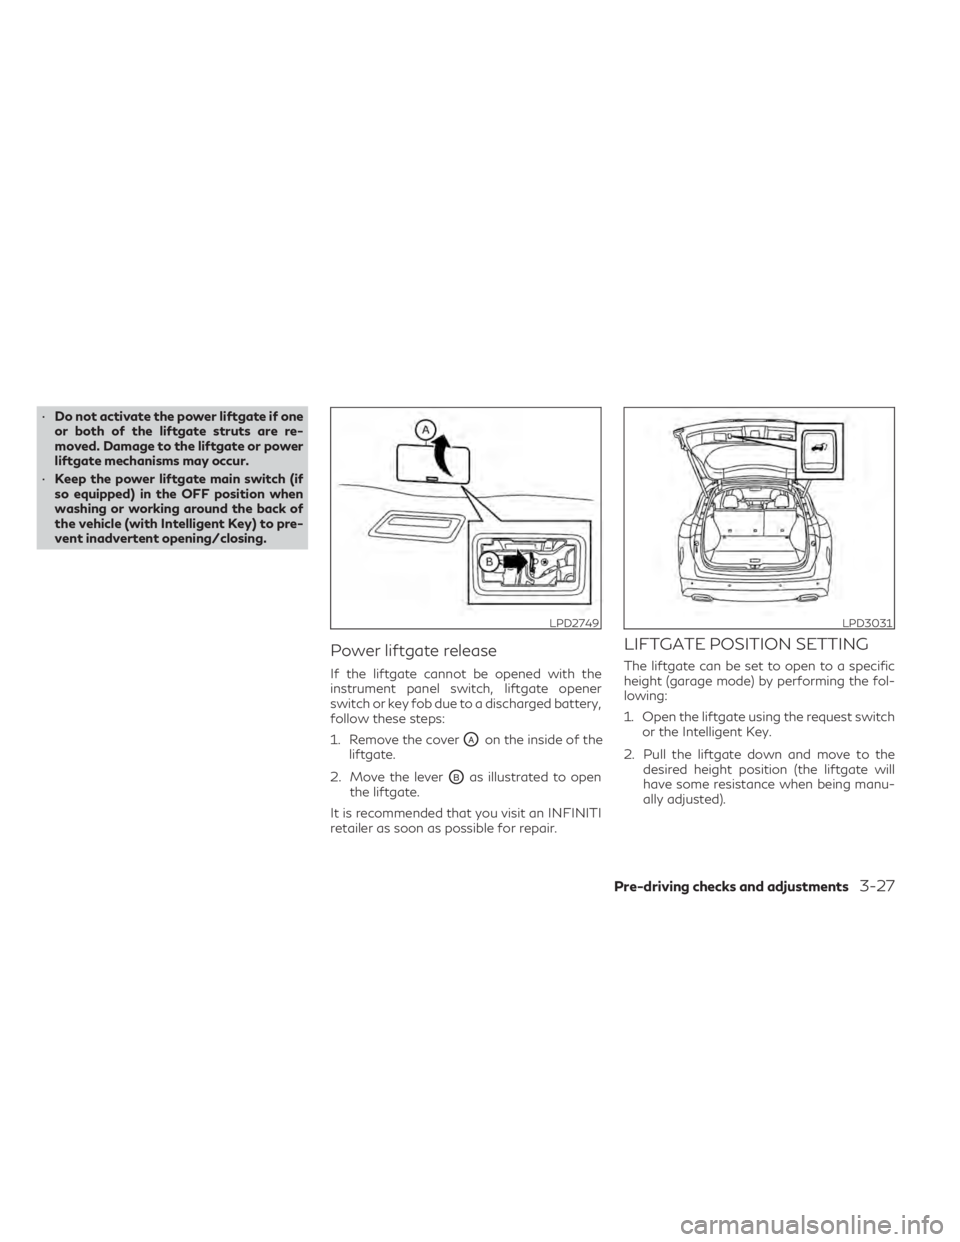 INFINITI QX50 2021  Owners Manual •Do not activate the power liftgate if one
or both of the liftgate struts are re-
moved. Damage to the liftgate or power
liftgate mechanisms may occur.
• Keep the power liftgate main switch (if
so